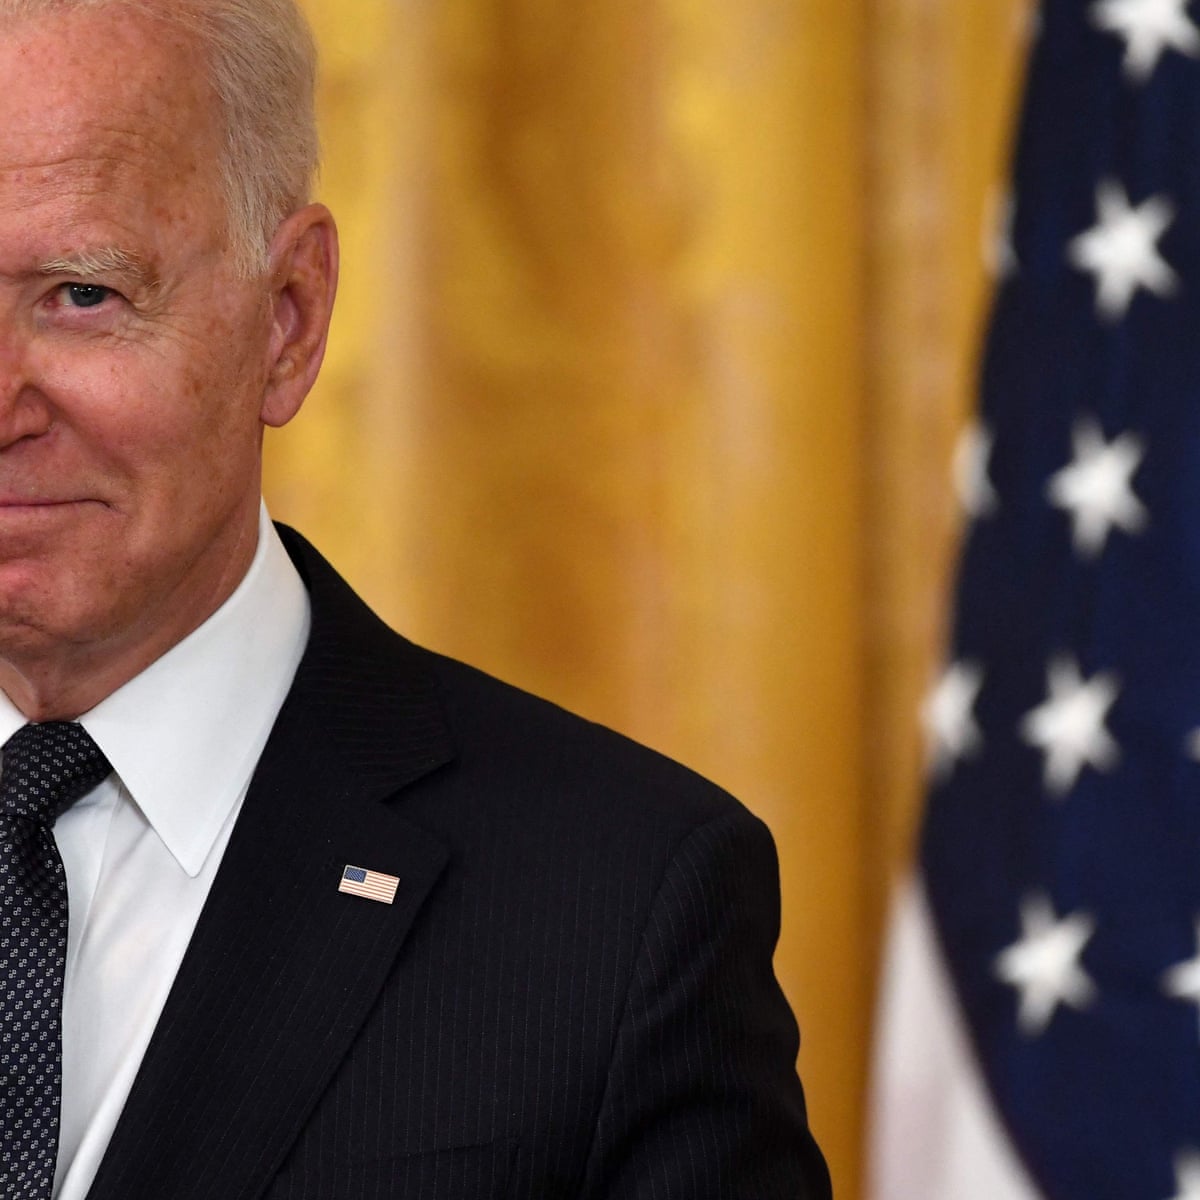 joe biden needs to own it and apologize and keep his hands to himself - Biden|President|Joe|States|Delaware|Obama|Vice|Senate|Campaign|Election|Time|Administration|House|Law|People|Years|Family|Year|Trump|School|University|Senator|Office|Party|Country|Committee|Act|War|Days|Climate|Hunter|Health|America|State|Day|Democrats|Americans|Documents|Care|Plan|United States|Vice President|White House|Joe Biden|Biden Administration|Democratic Party|Law School|Presidential Election|President Joe Biden|Executive Orders|Foreign Relations Committee|Presidential Campaign|Second Term|47Th Vice President|Syracuse University|Climate Change|Hillary Clinton|Last Year|Barack Obama|Joseph Robinette Biden|U.S. Senator|Health Care|U.S. Senate|Donald Trump|President Trump|President Biden|Federal Register|Judiciary Committee|Presidential Nomination|Presidential Medal